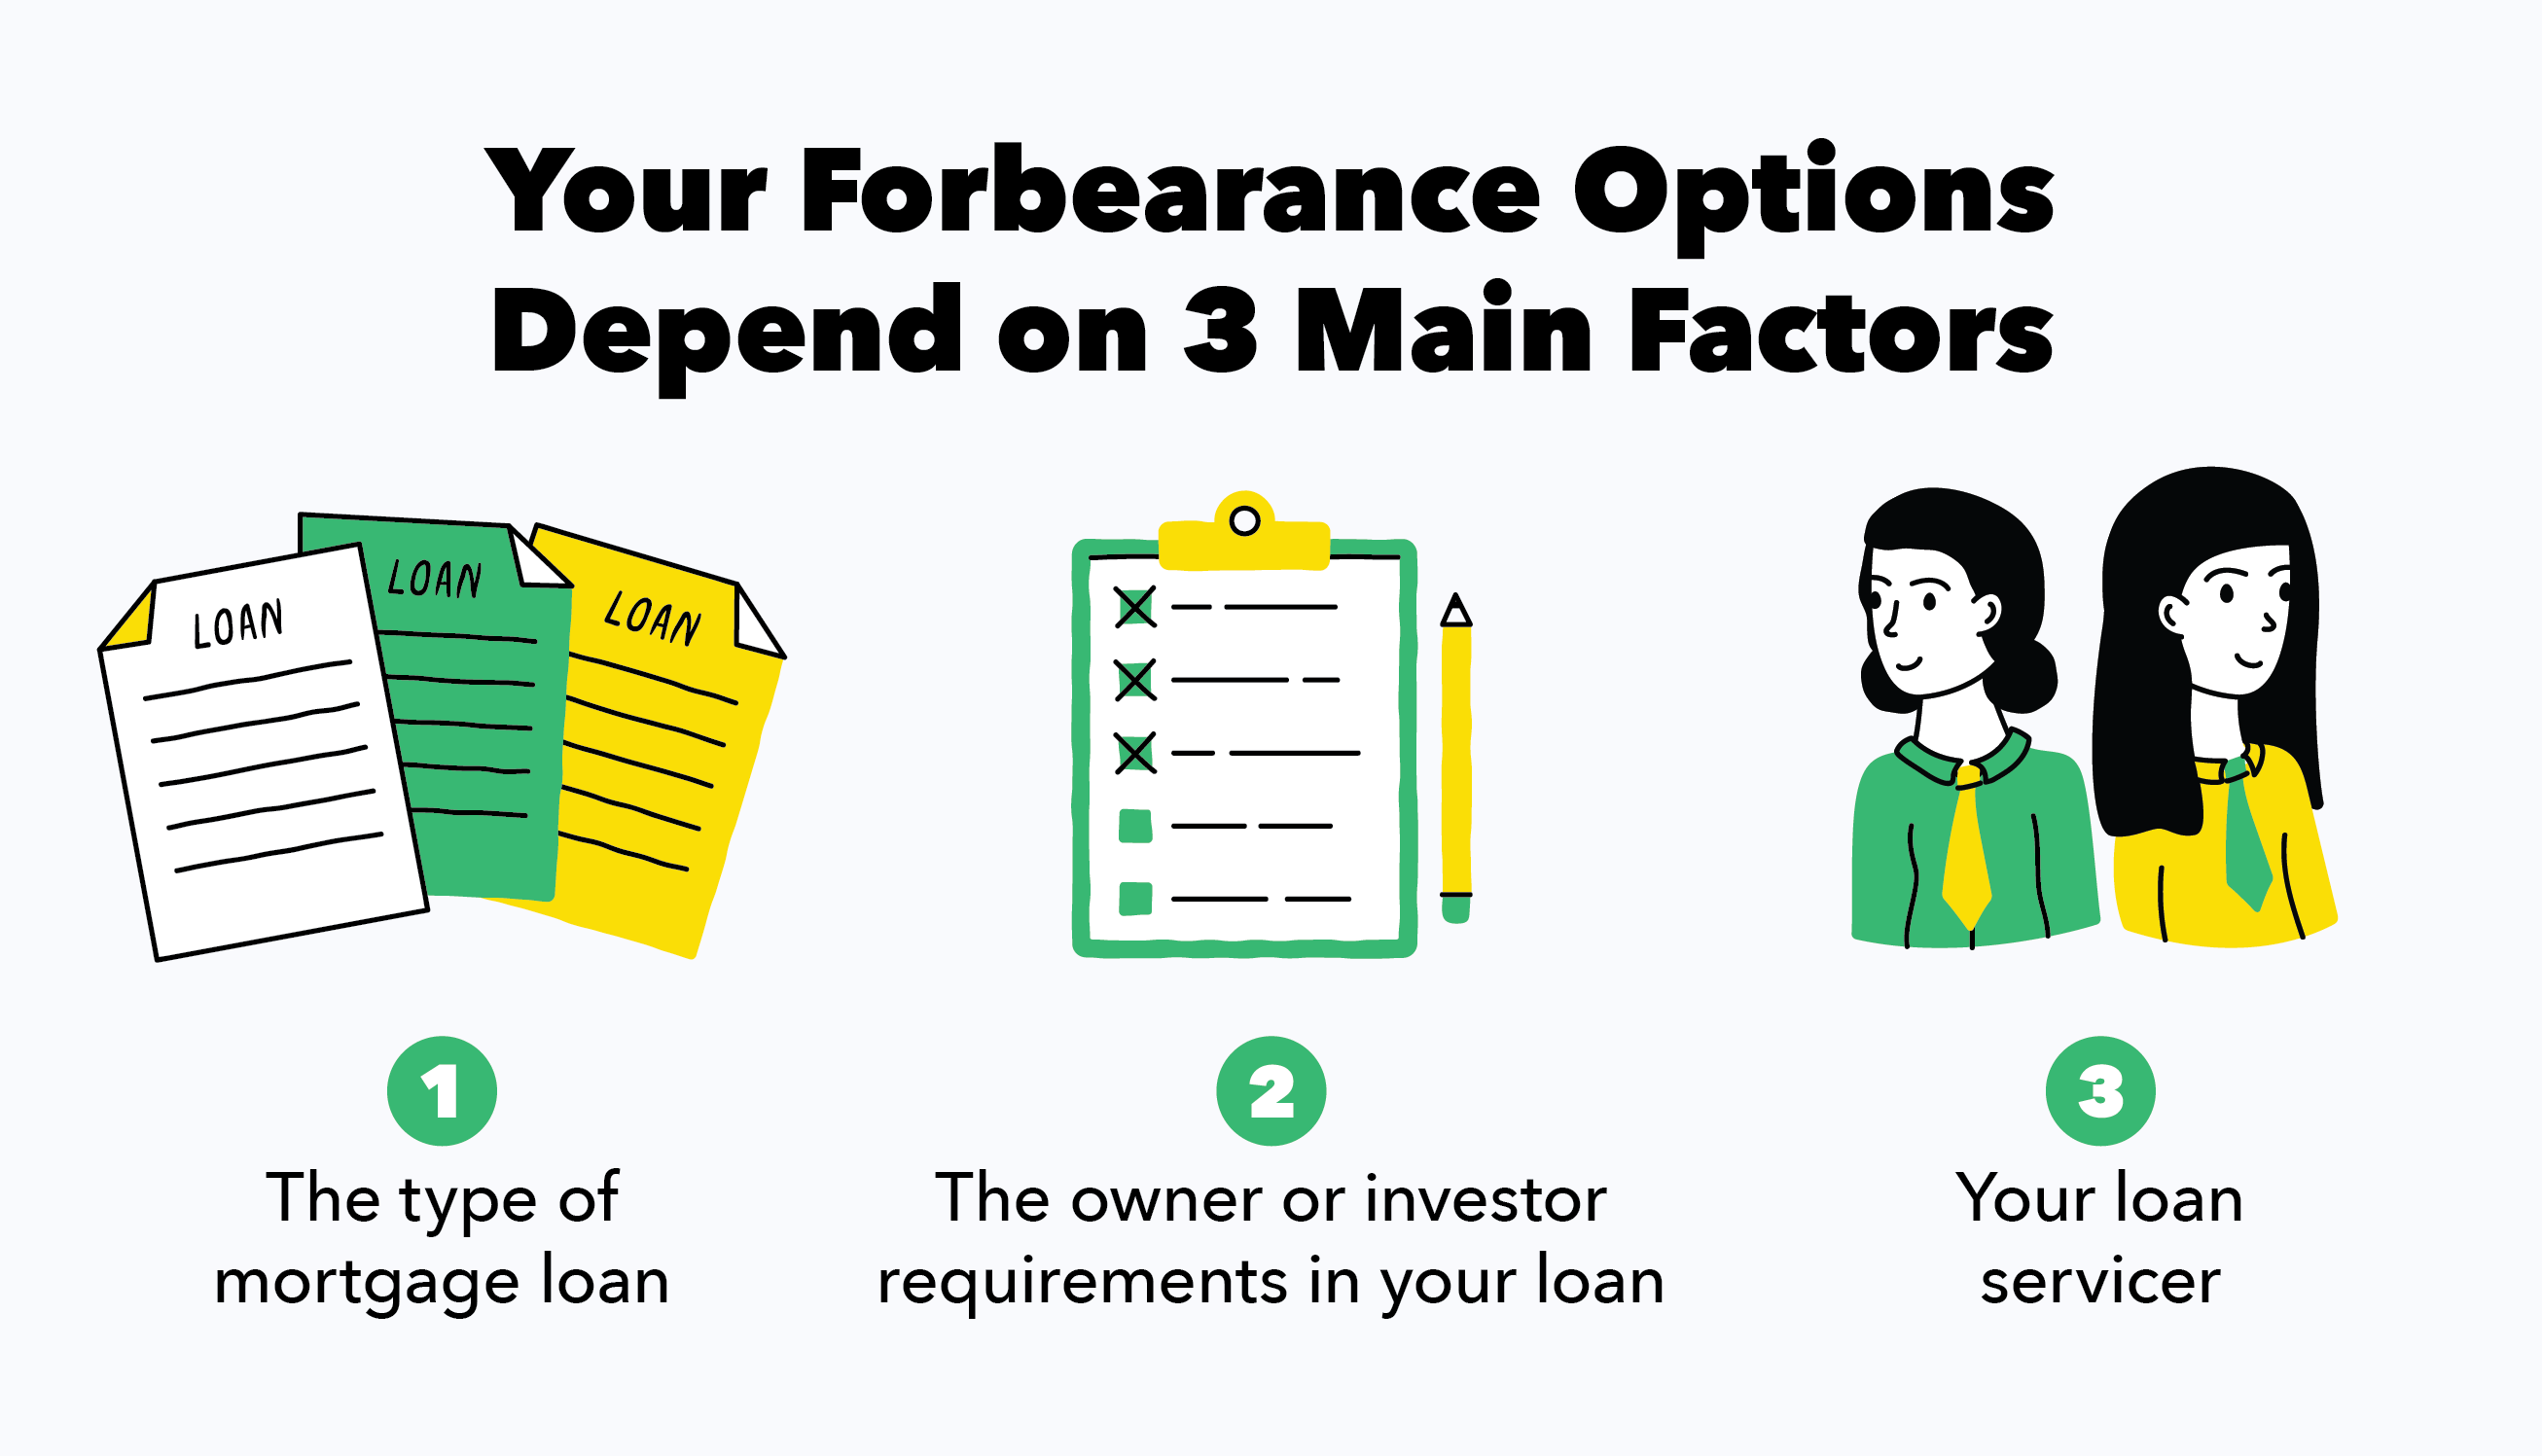 There are 3 options for forbearance